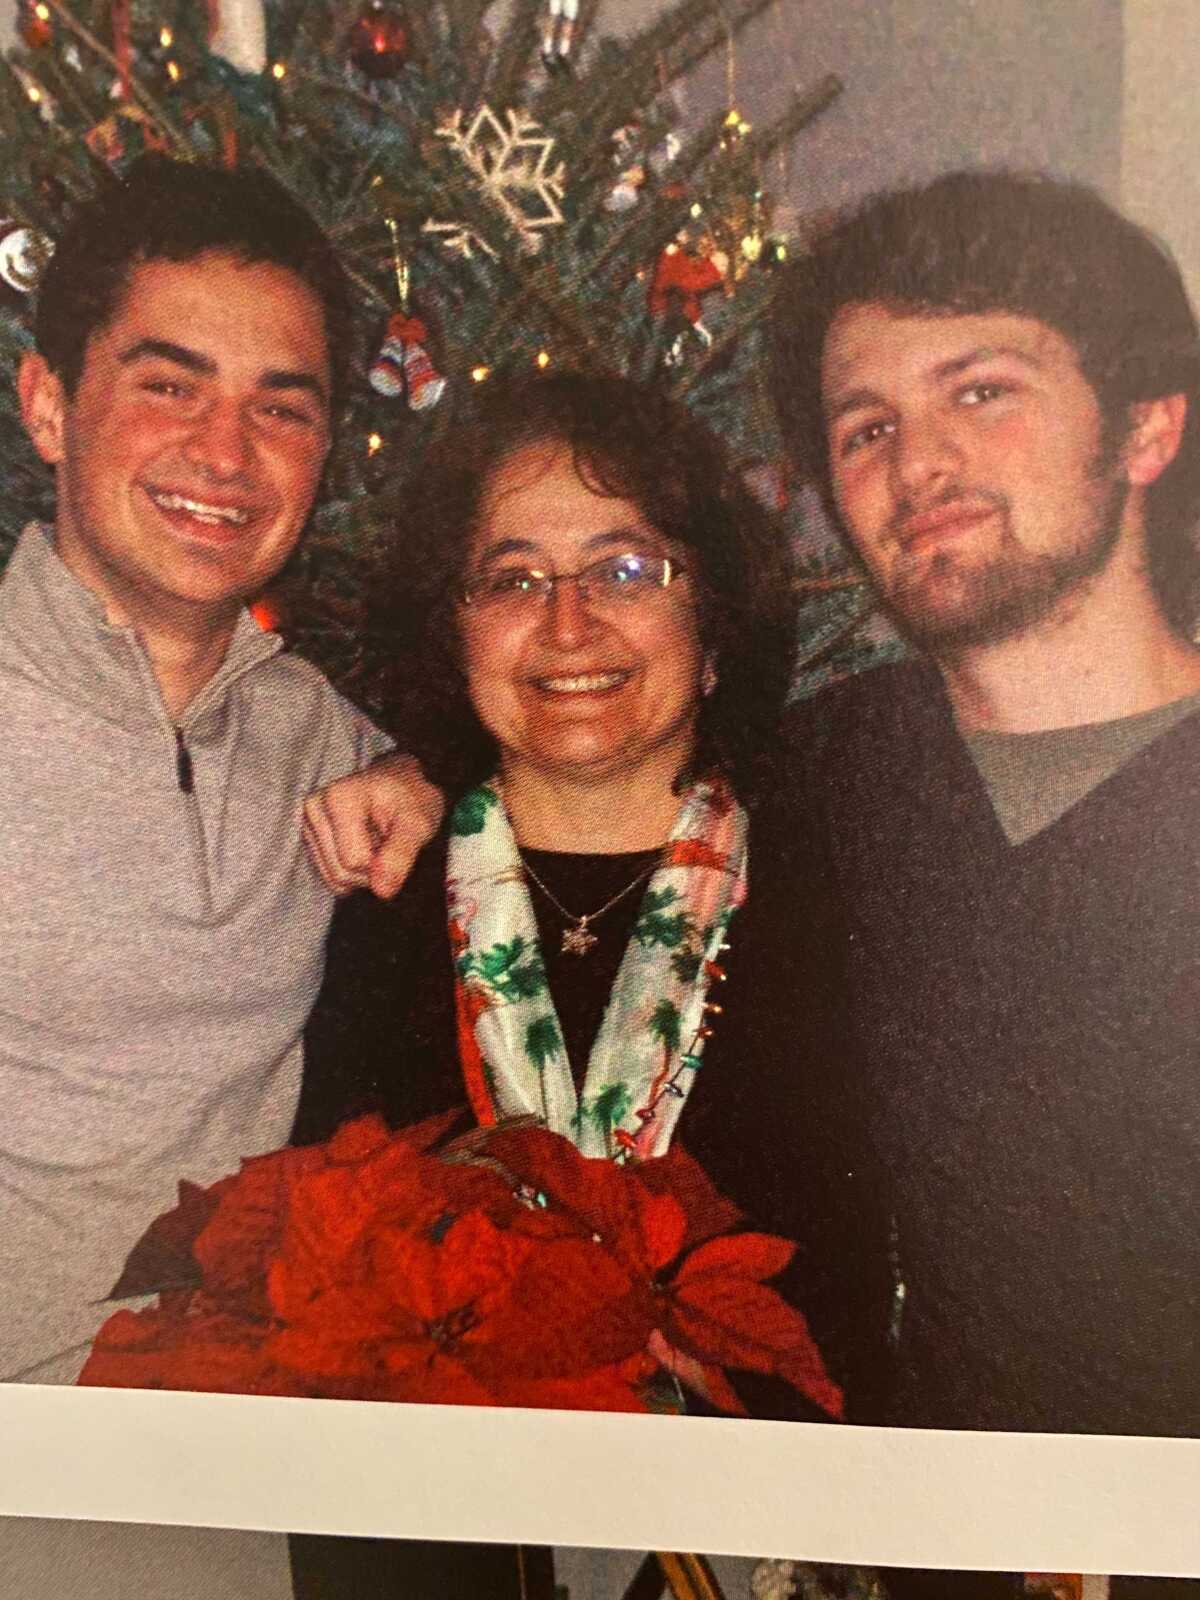 A family photo of a mother and her two adult sons in front of a Christmas tree